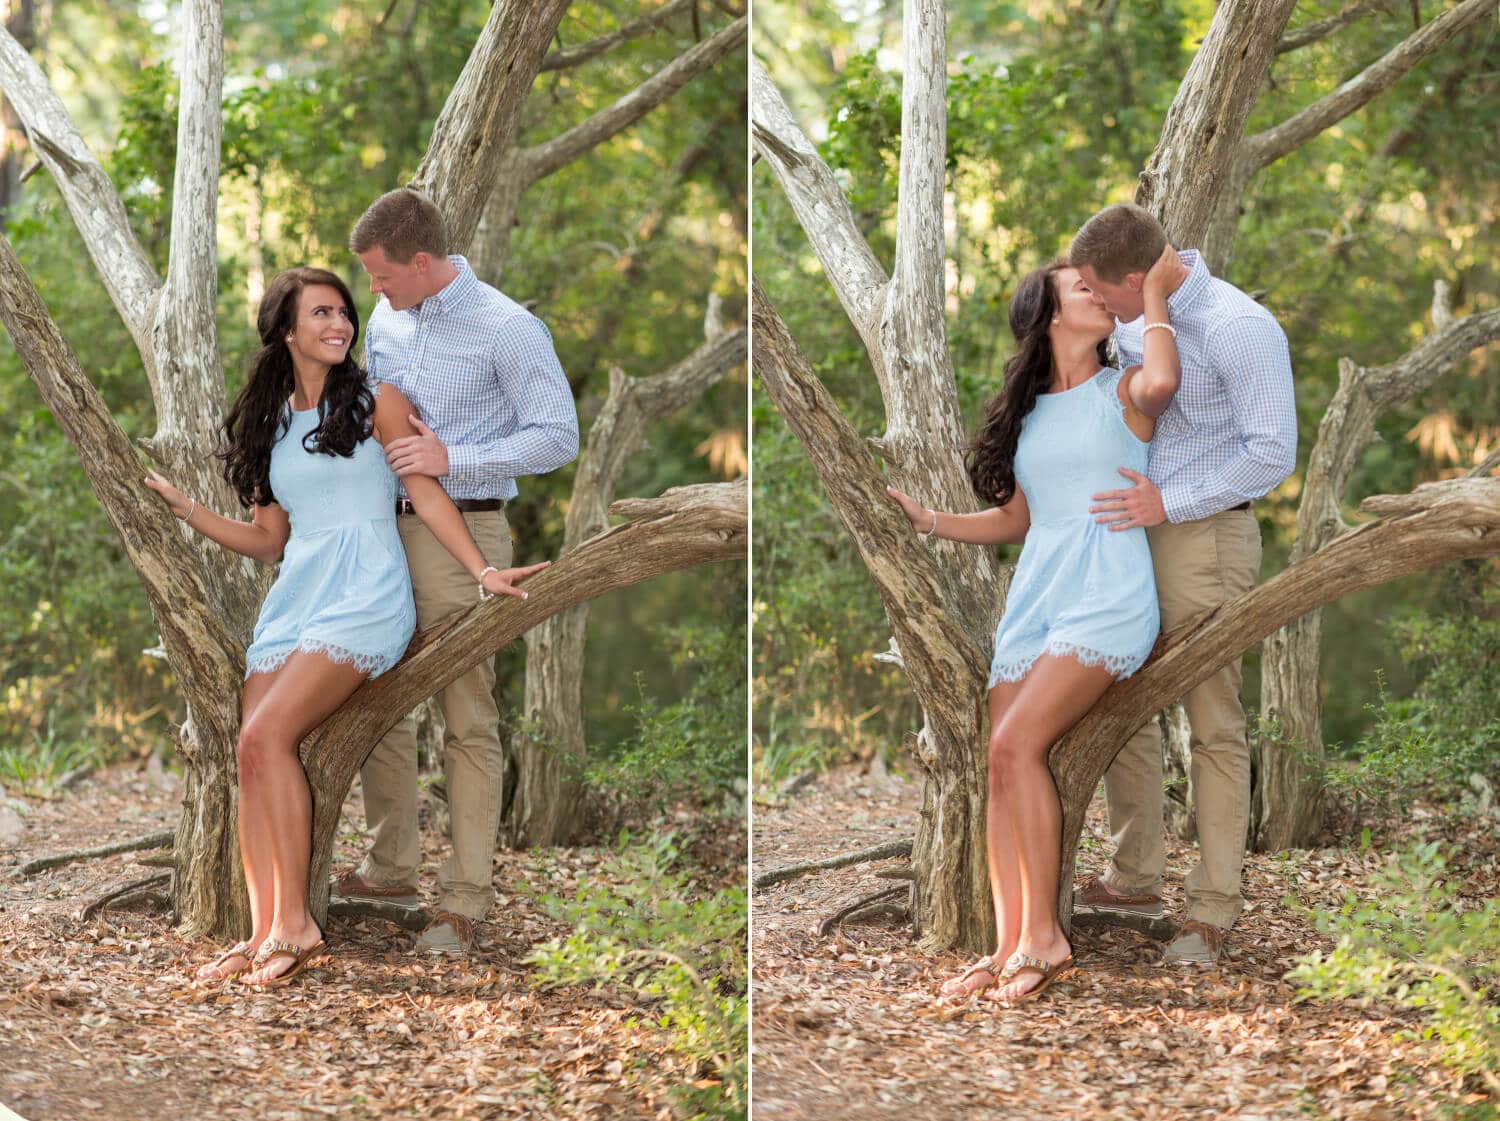 Couple leaning against the dead oak tree in the park